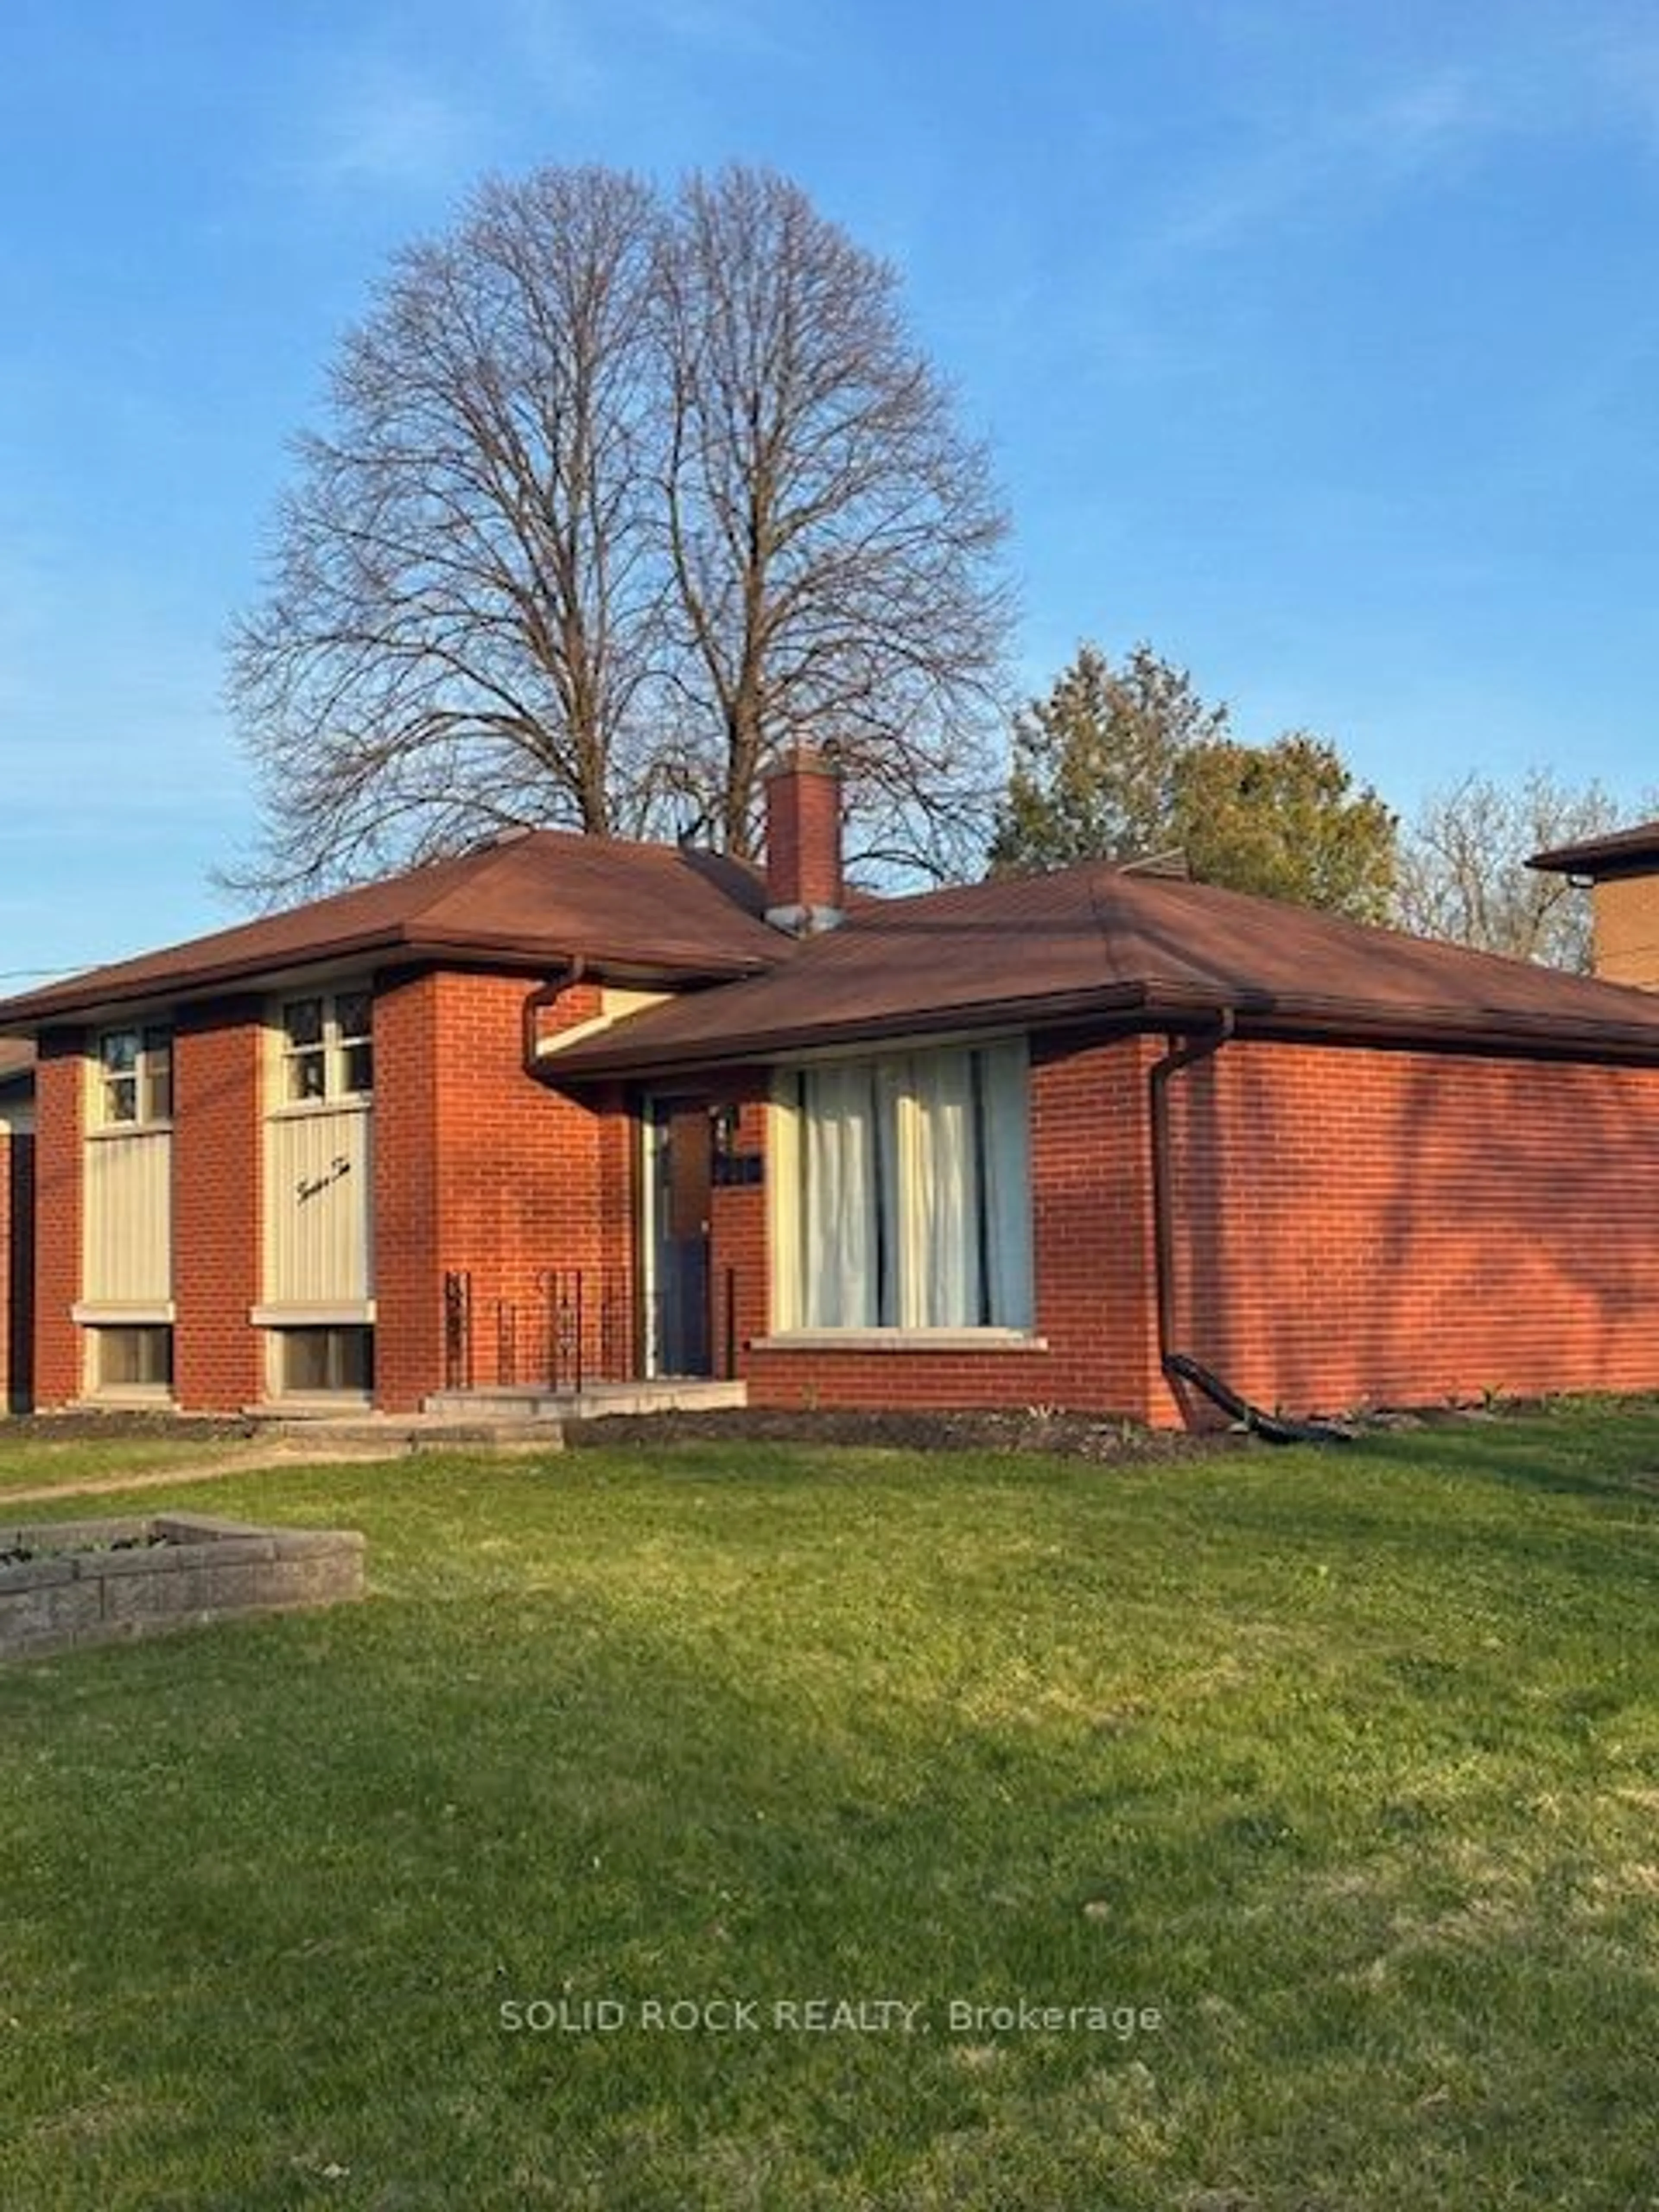 Home with brick exterior material for 1210 Homuth Ave, Cambridge Ontario N3H 2C9